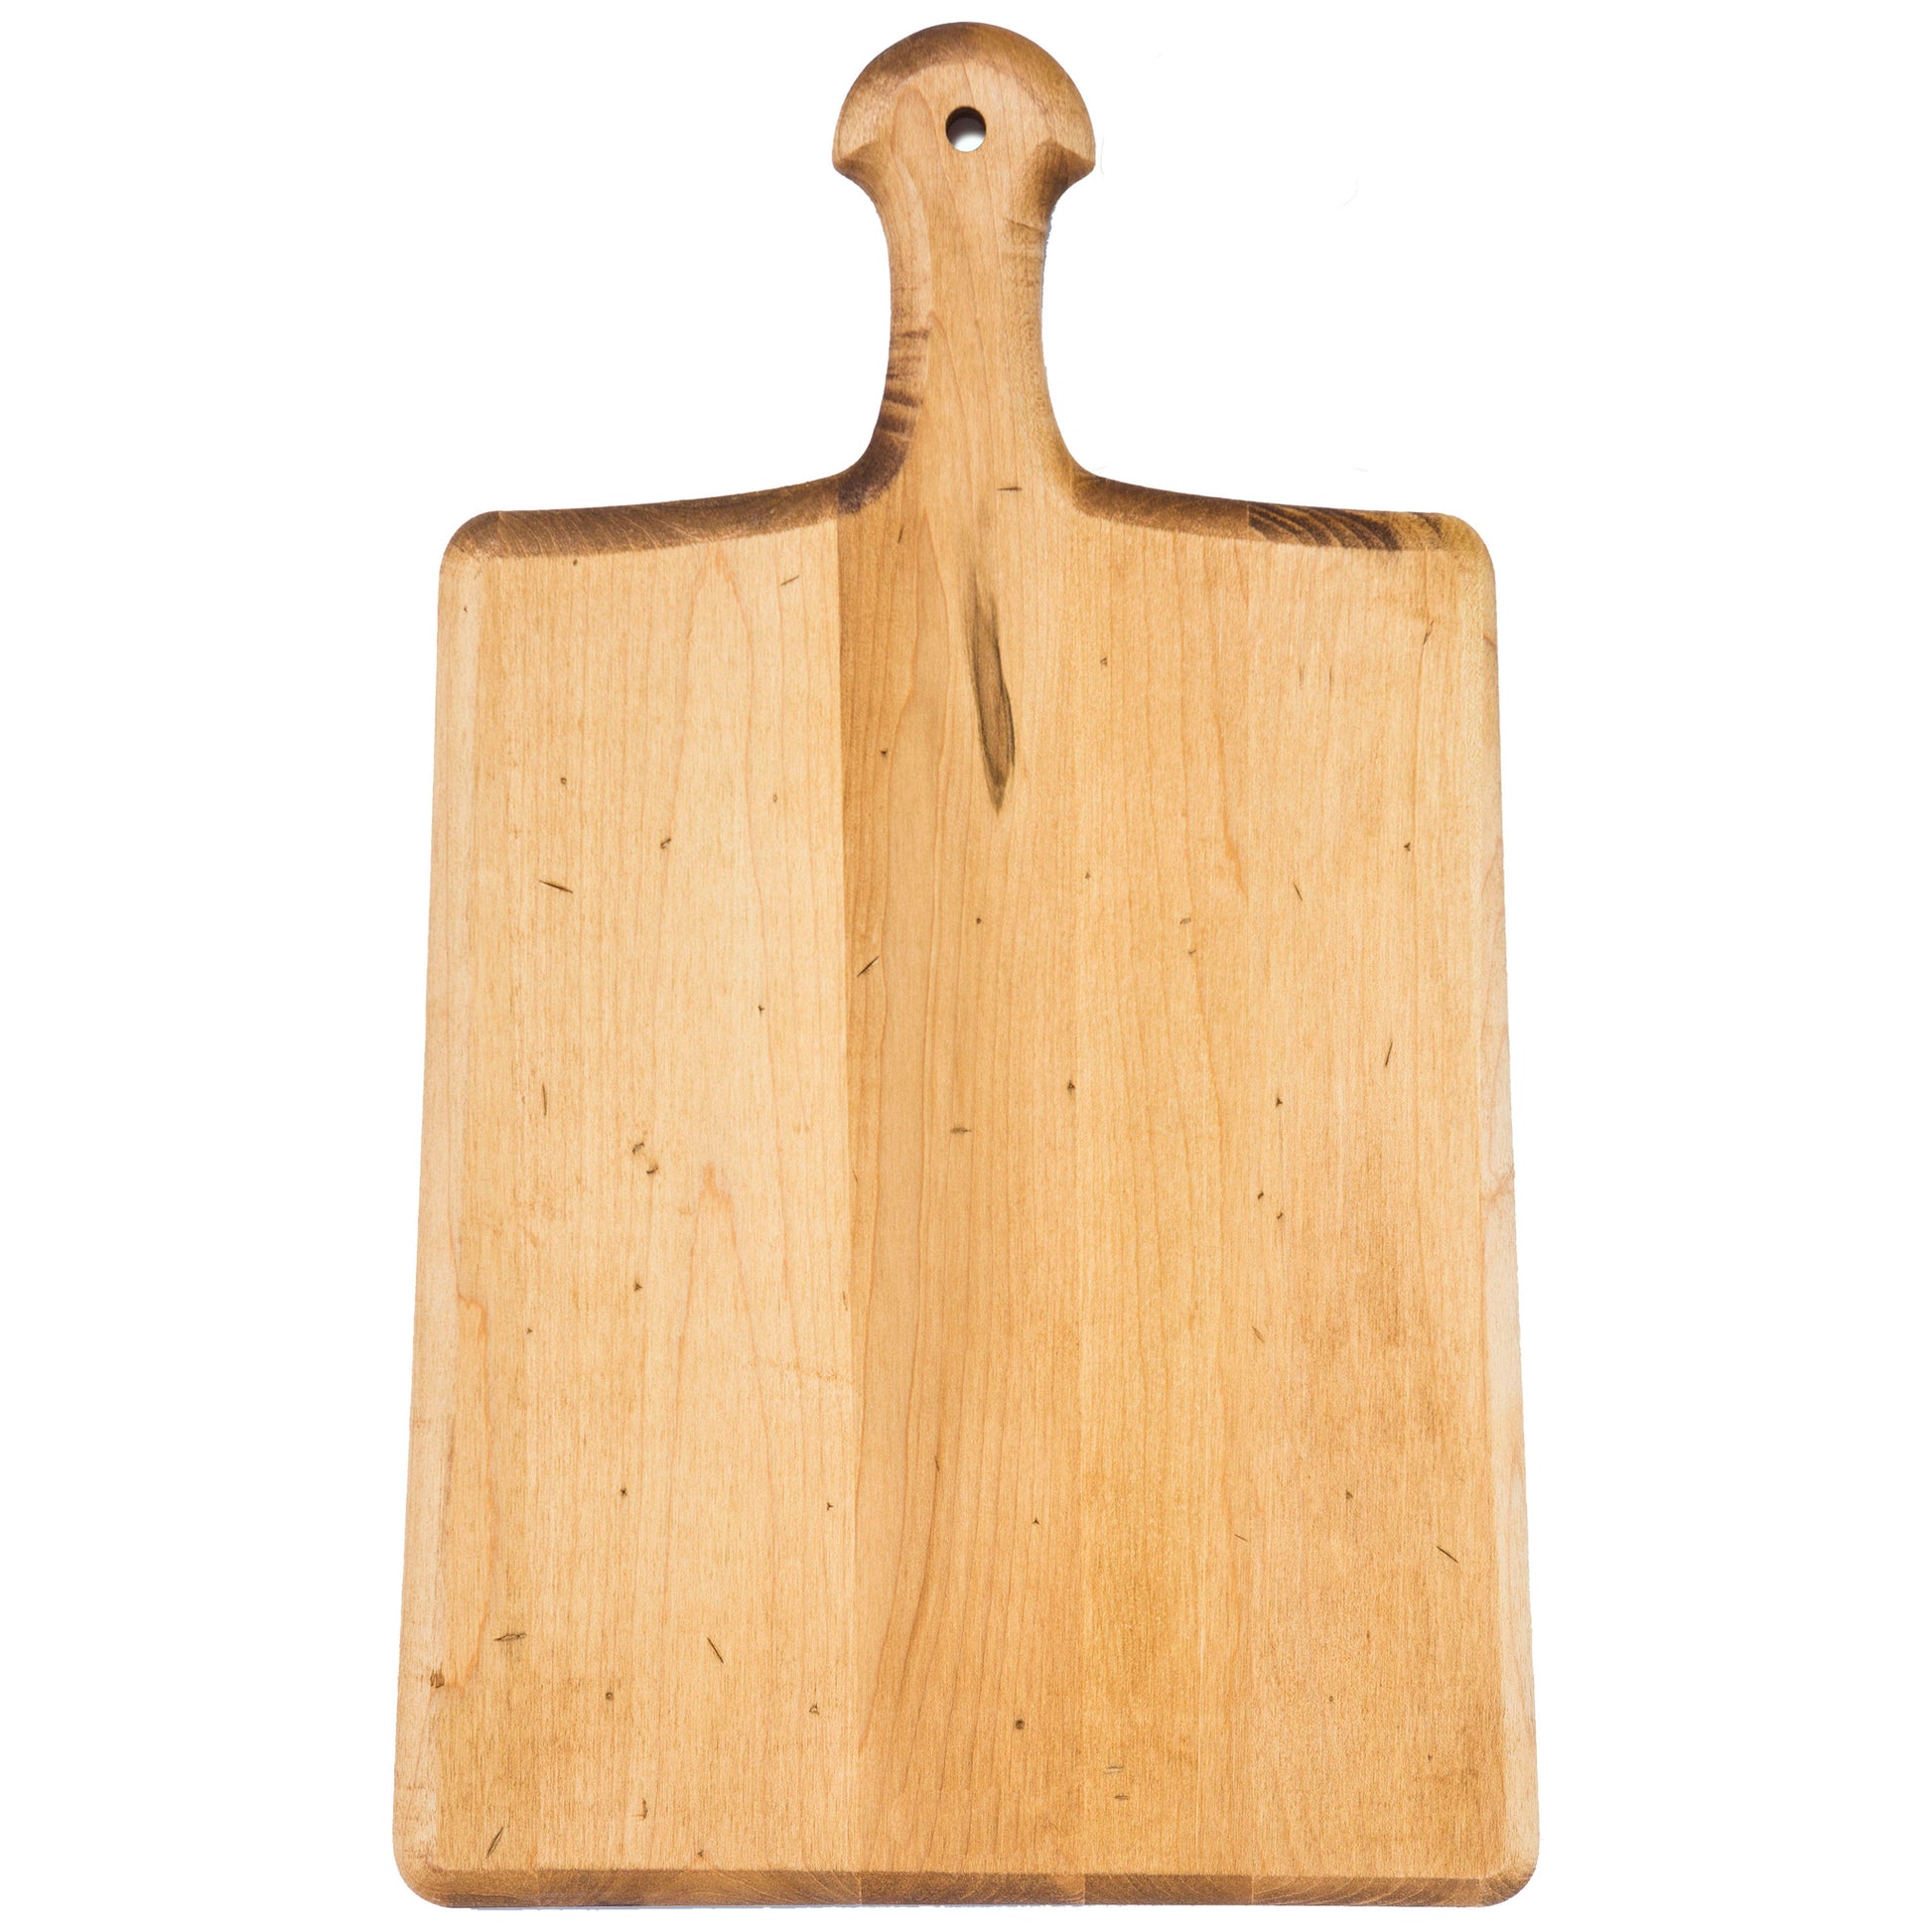 Maple Paddle Serving Board-17 3/4" x 11"